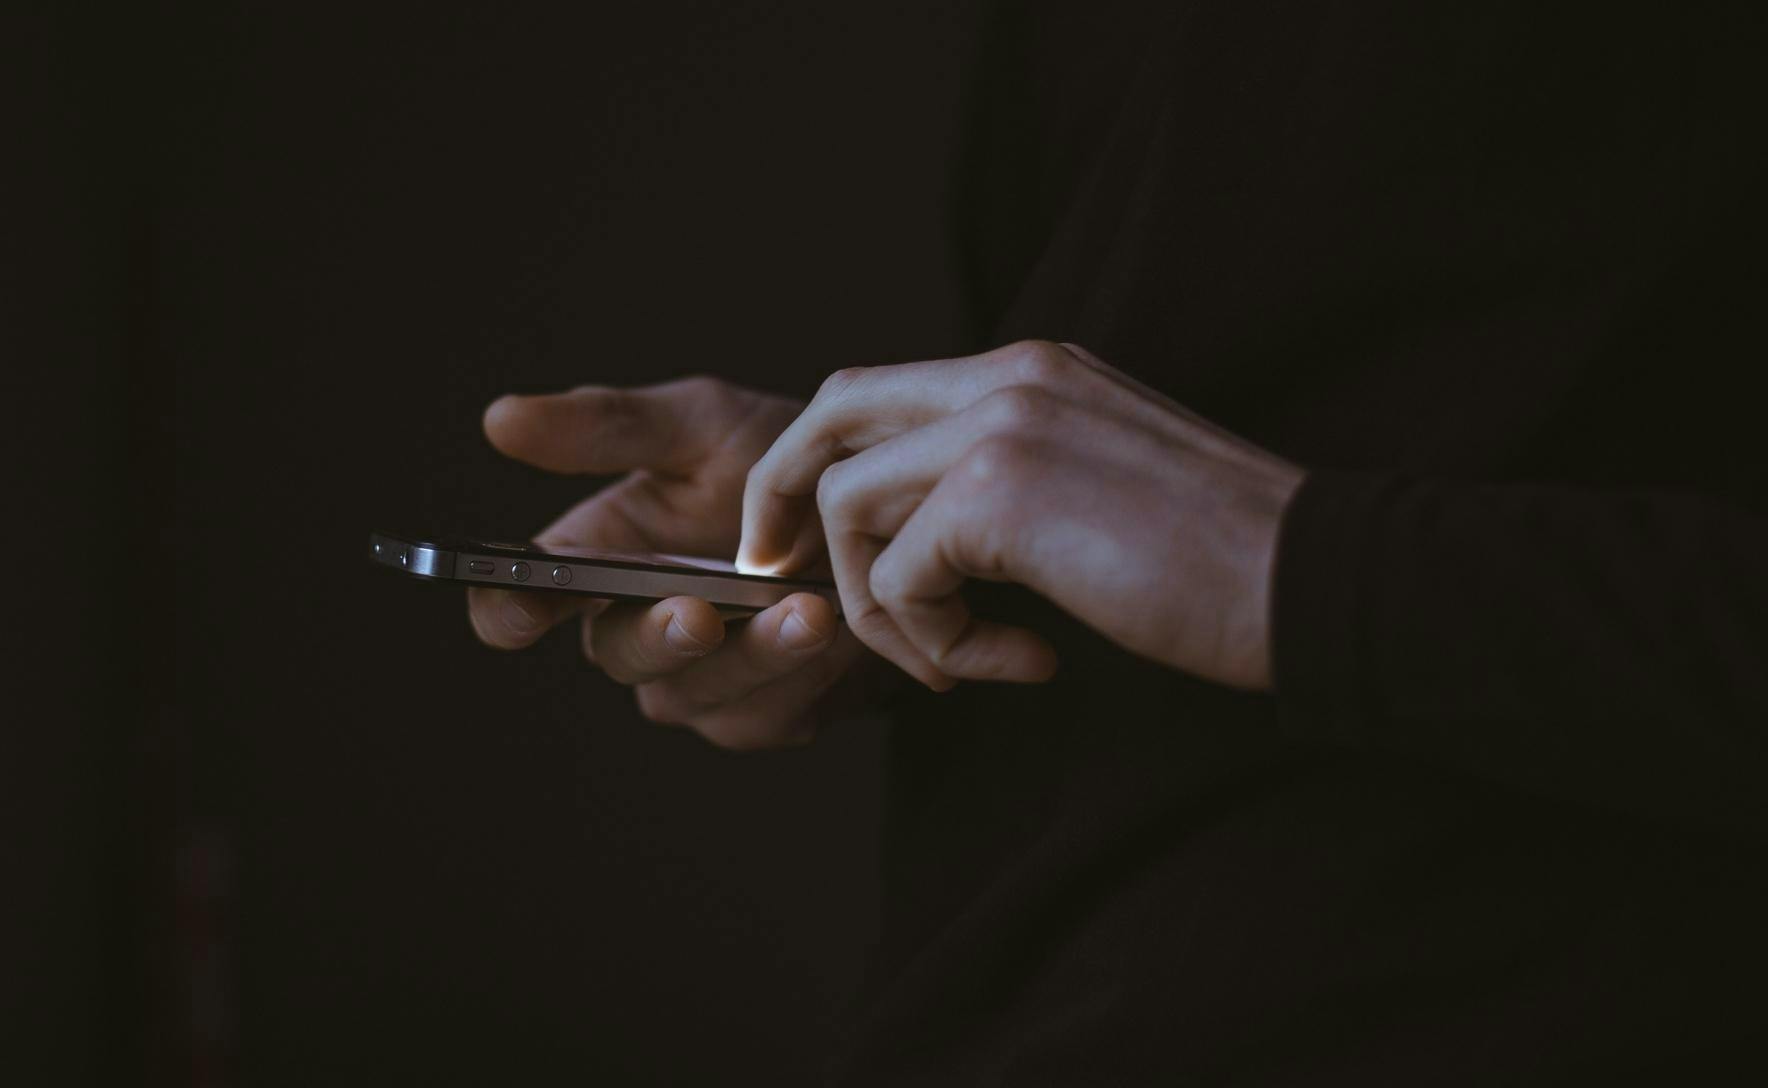 black backrgound with a close up of a person's hands holding a mobile phone